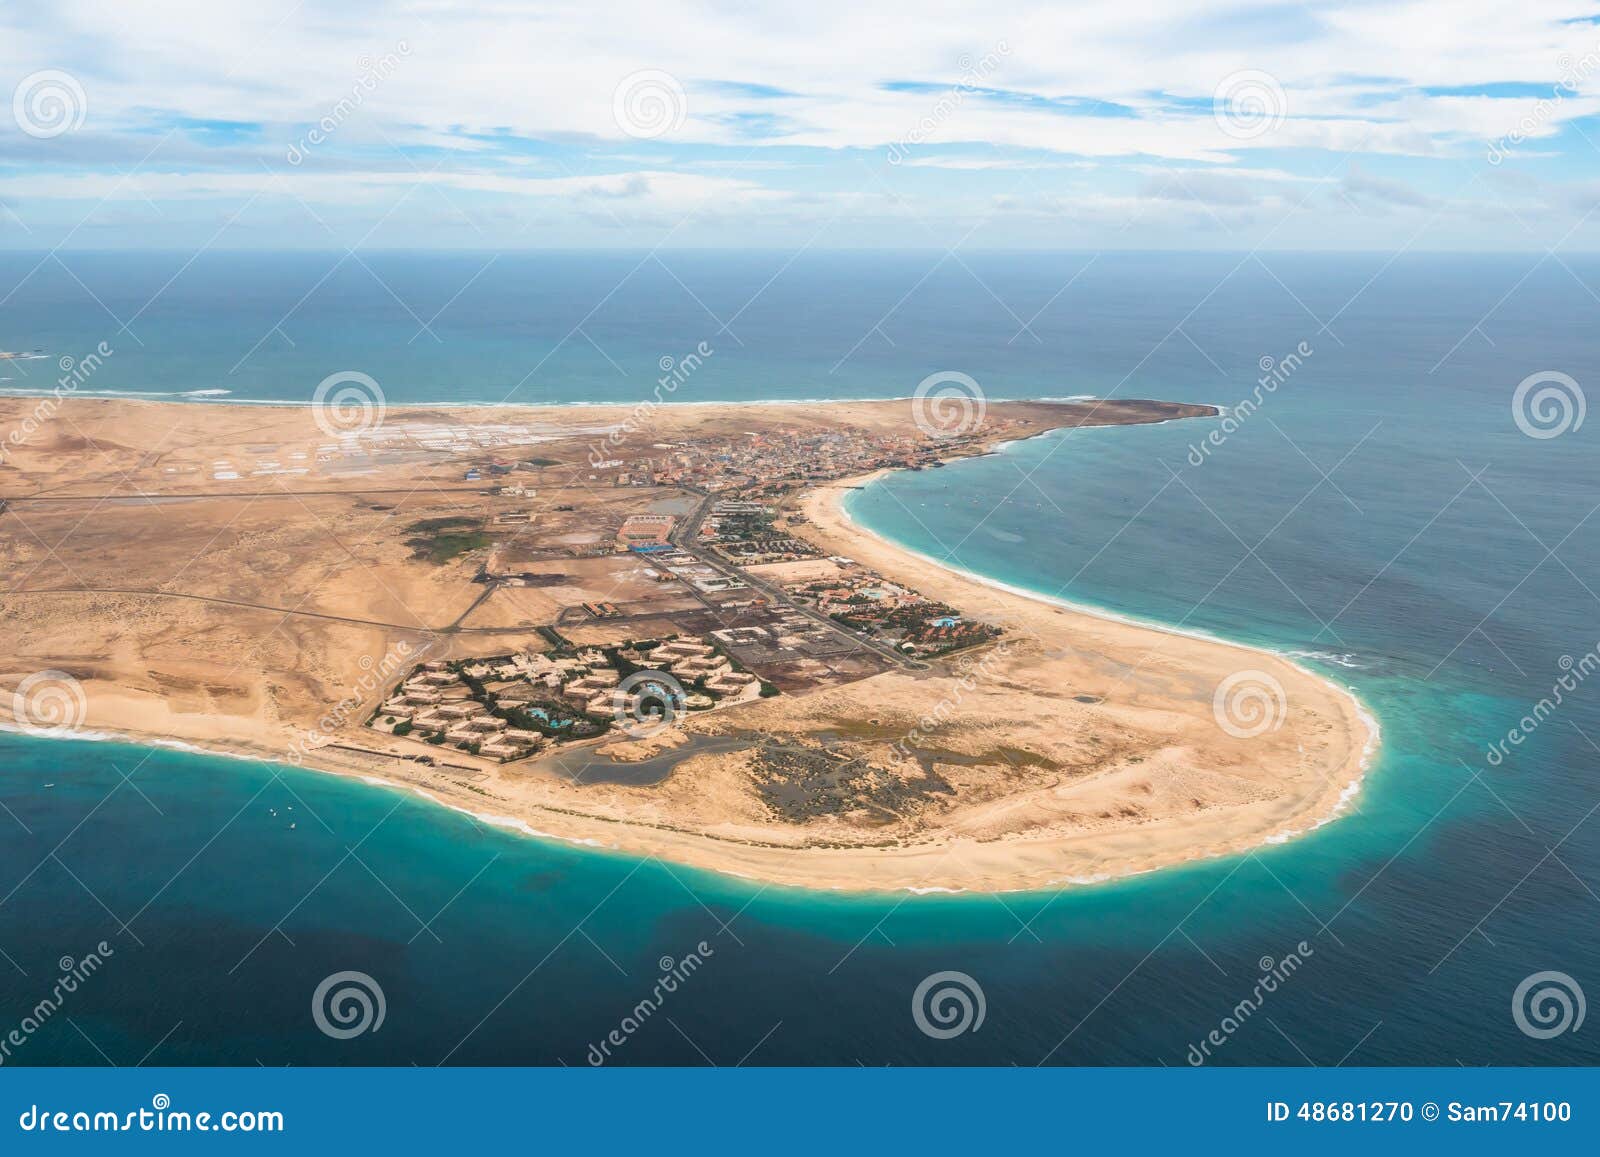 Aerial View of Maria in Sal Island Verde - Cabo Verde Stock Photo - Image of desert, cabo: 48681270